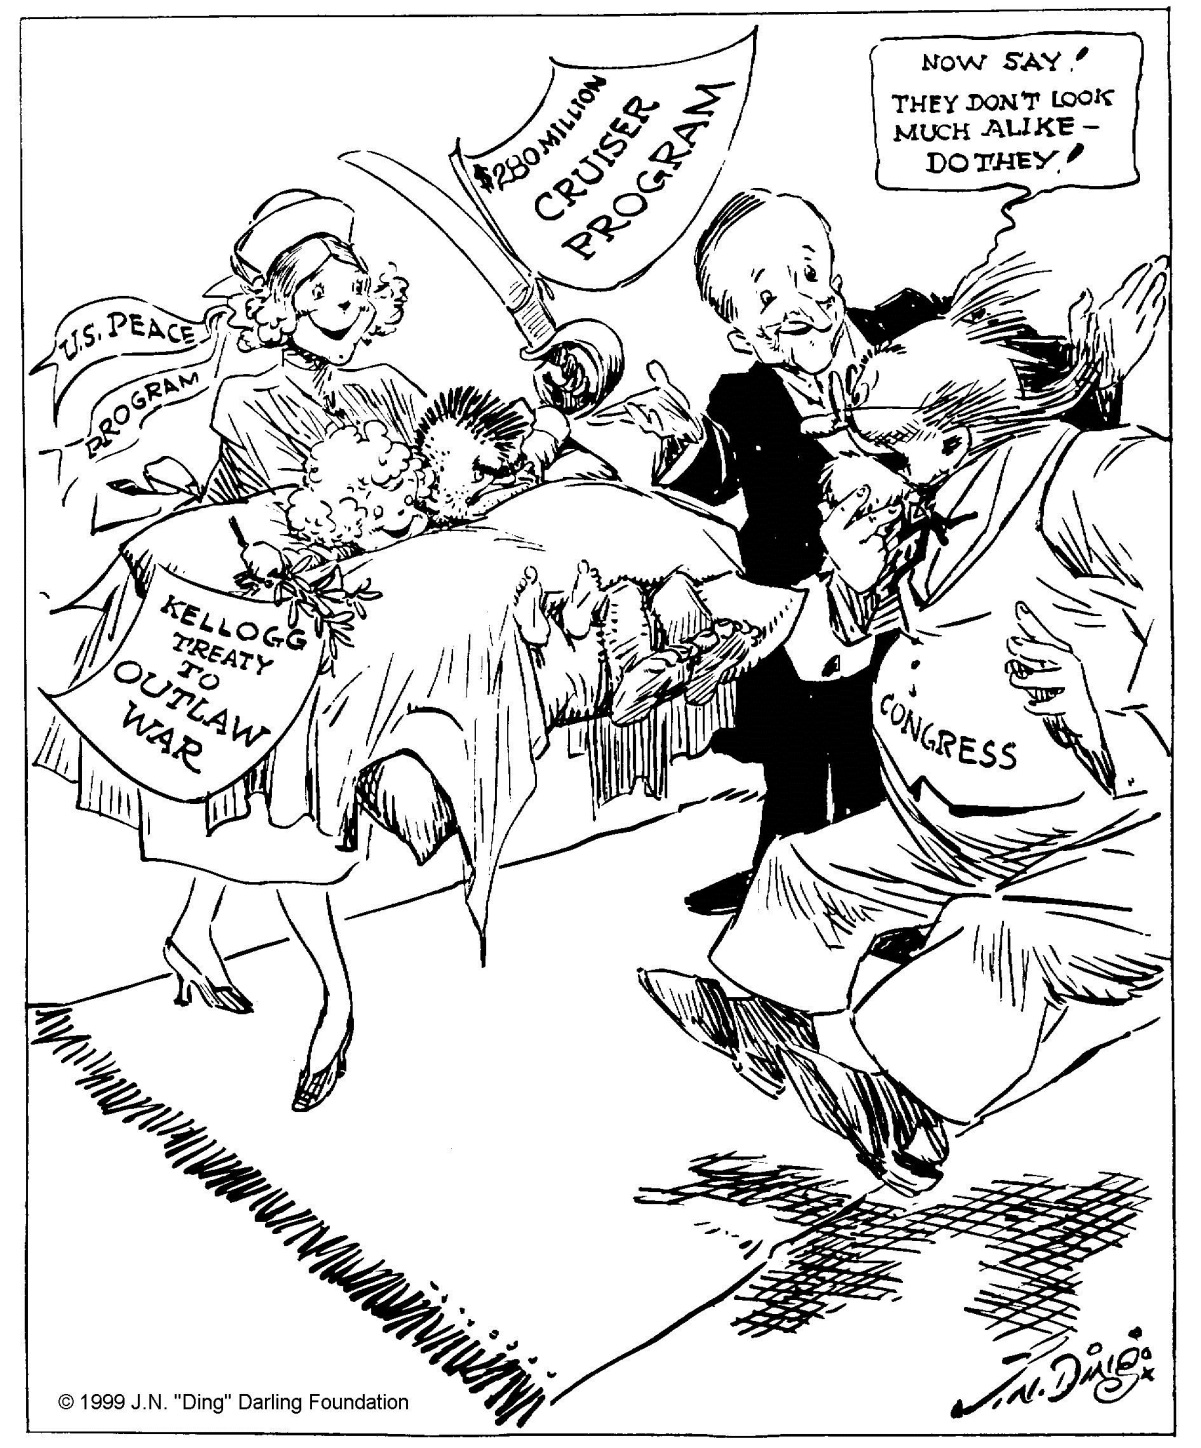 "Presenting him with twins," by "Ding" Darling, The Des Moines Register, November 28, 1928. Despite the cartoonist's not-so-veiled criticism at perceived inconsistency between these twin policies advanced by Coolidge, Cal reminds us that peace and adequate defense go hand-in-hand. One does not undermine the other. Cartoon courtesy of the Ding Darling Foundation. 